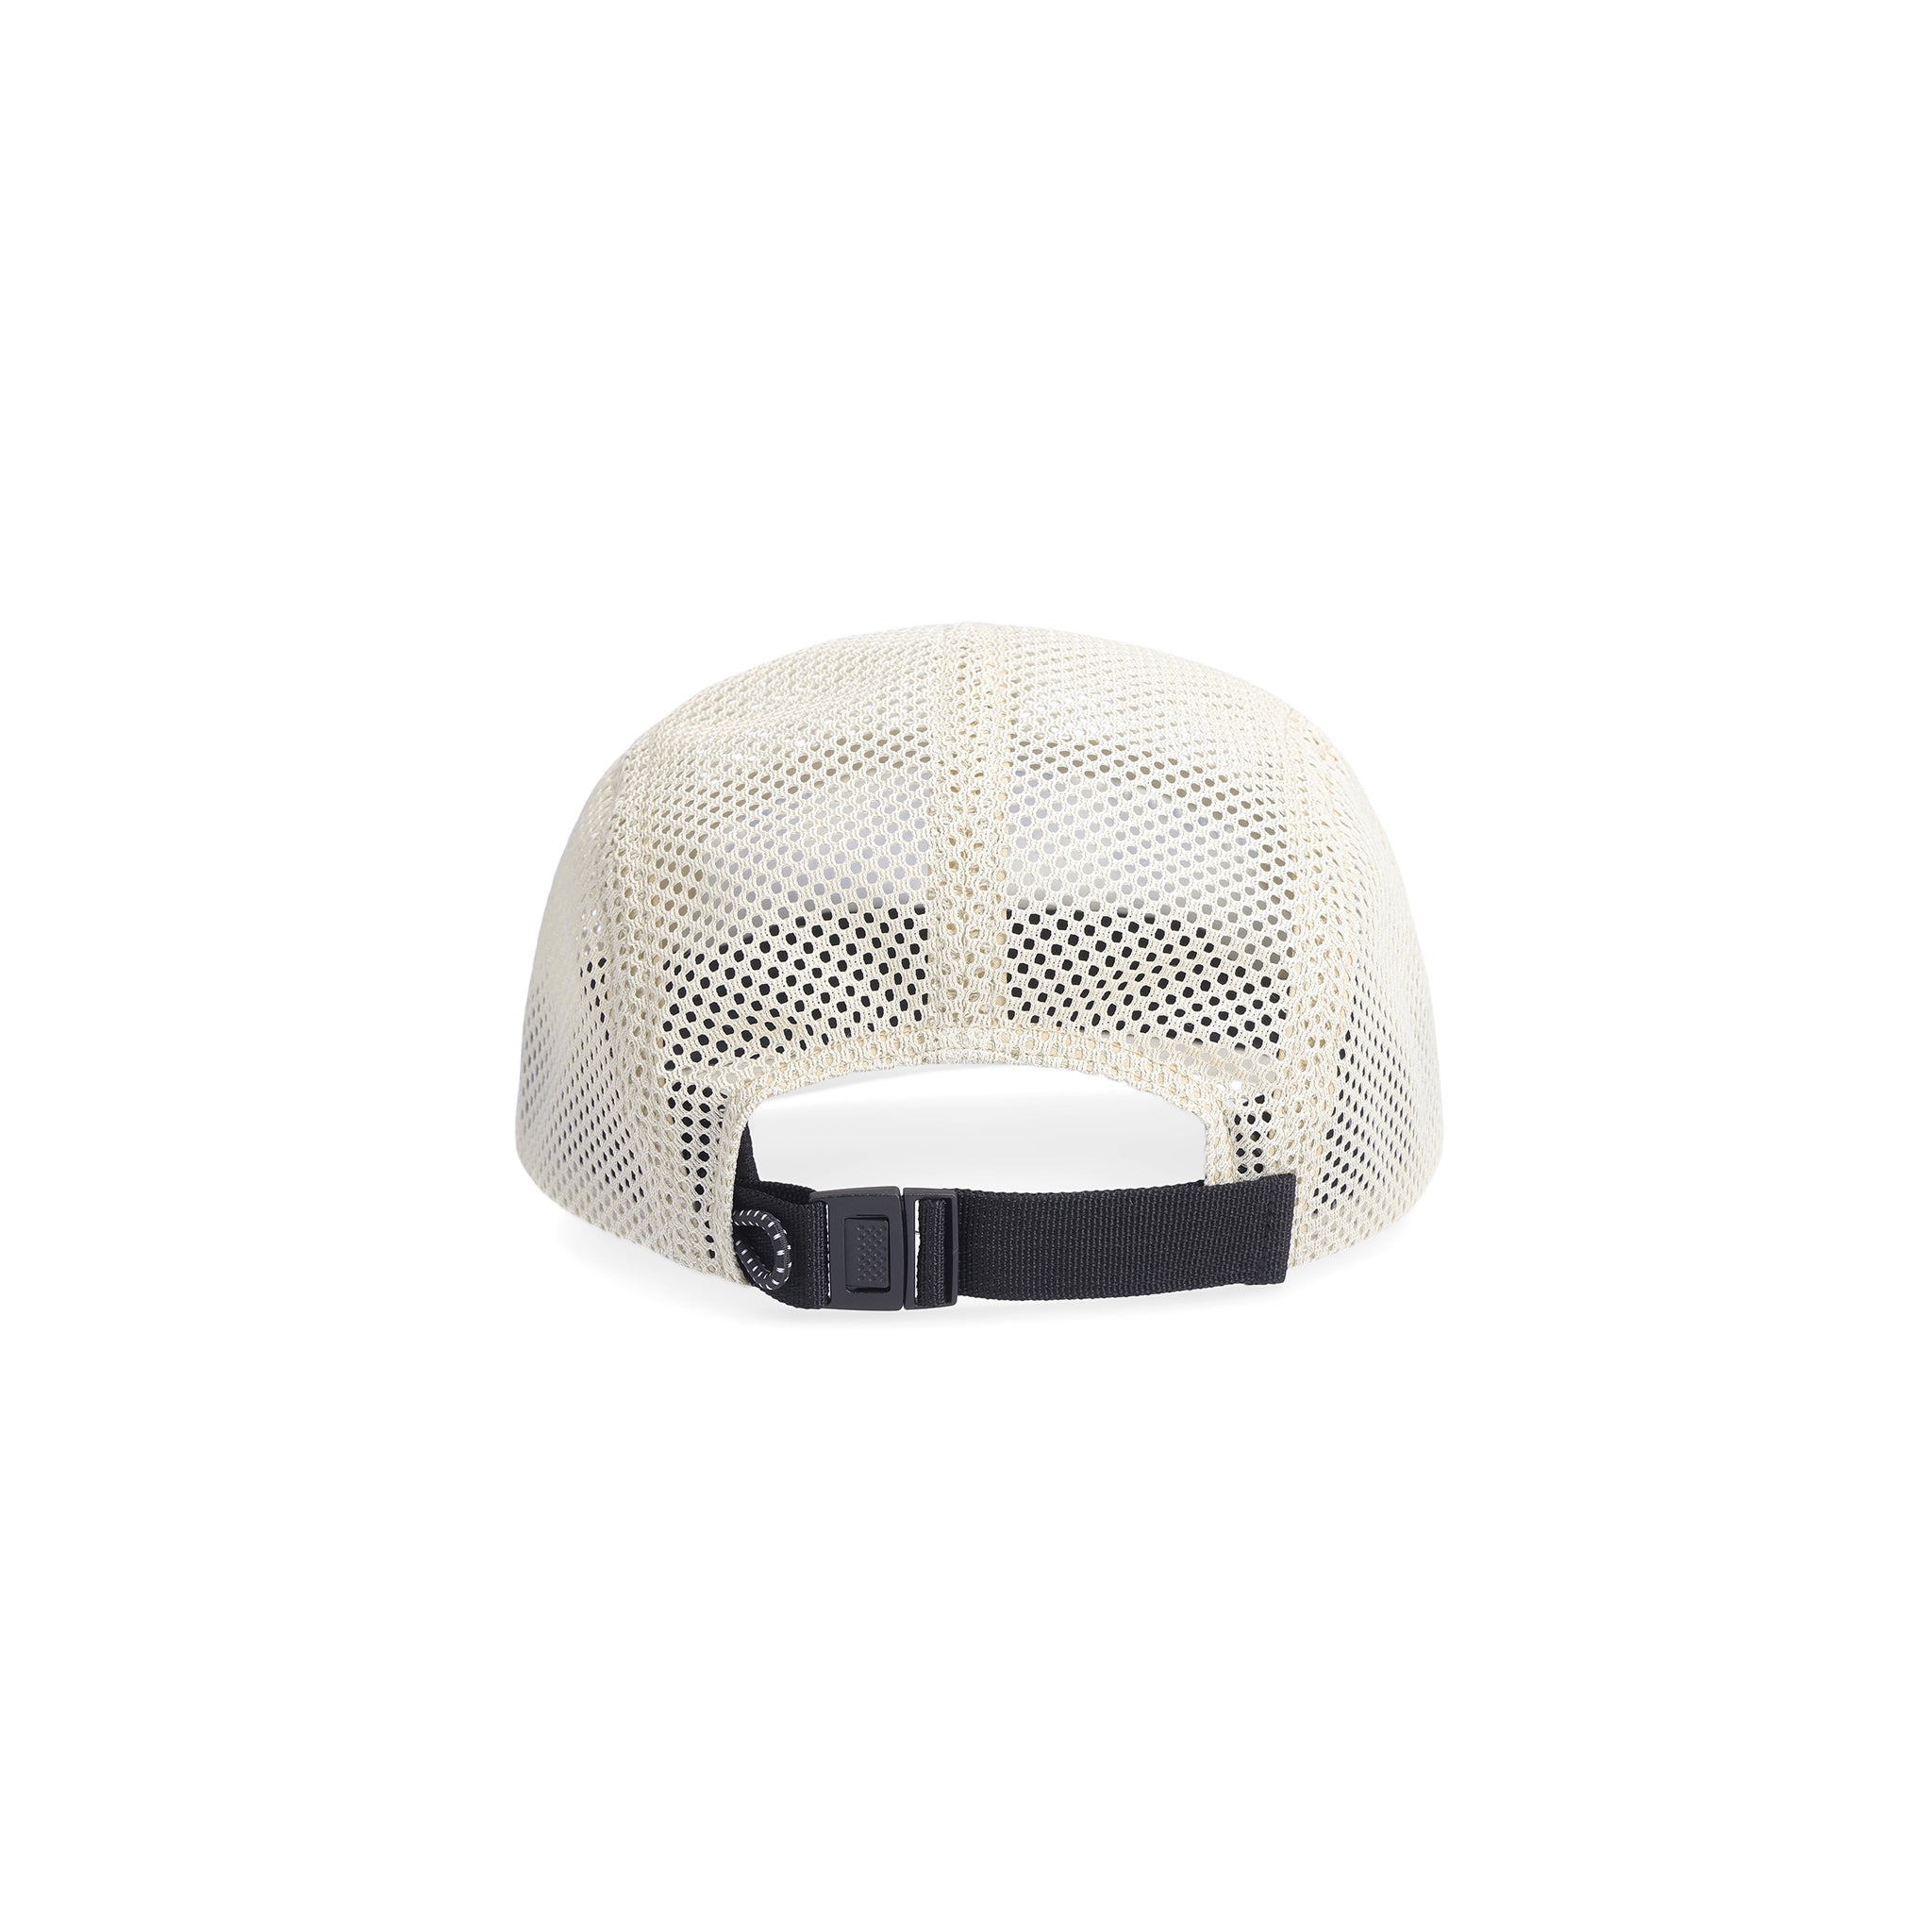 Back shot of Topo Designs Global mesh back Hat in "Sand / Pebble" white. Unstructured 5-panel flexible brim packable hat.